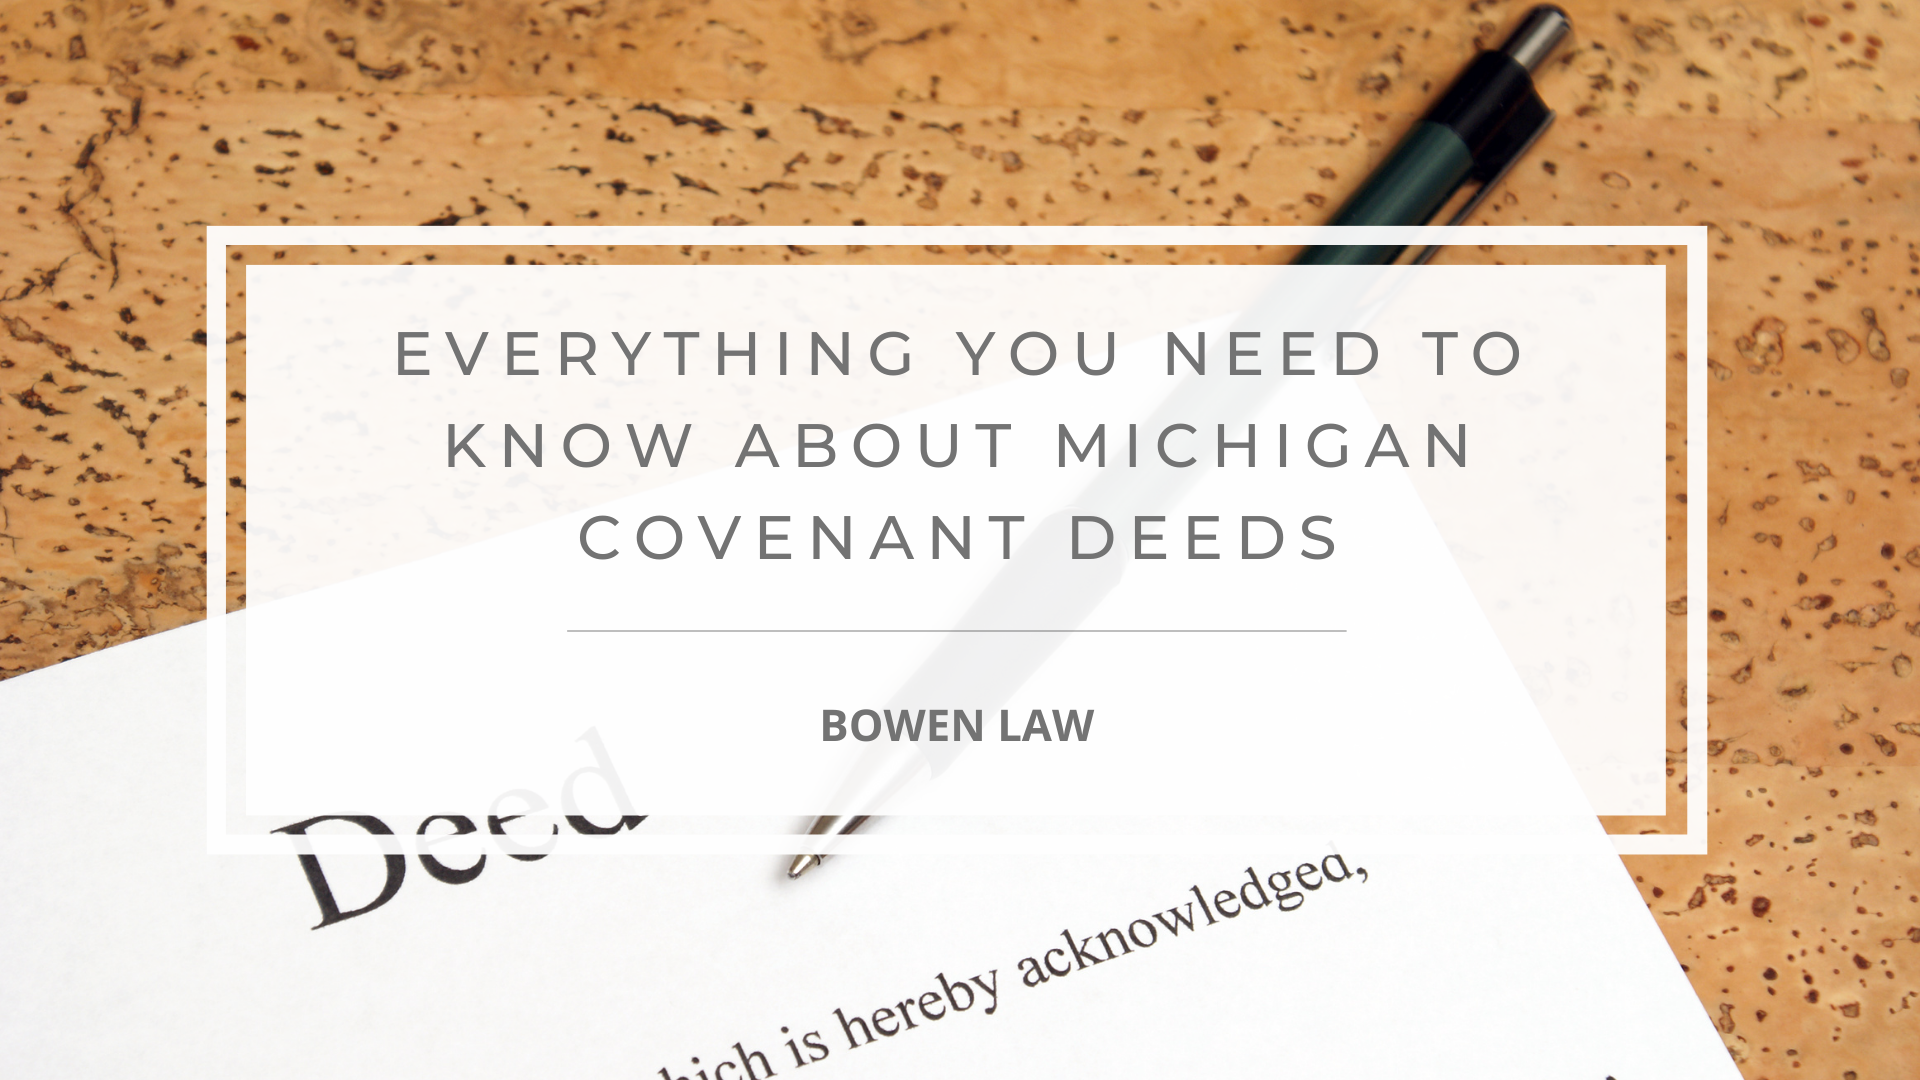 Featured image of everything you need to know about Michigan covenant deeds